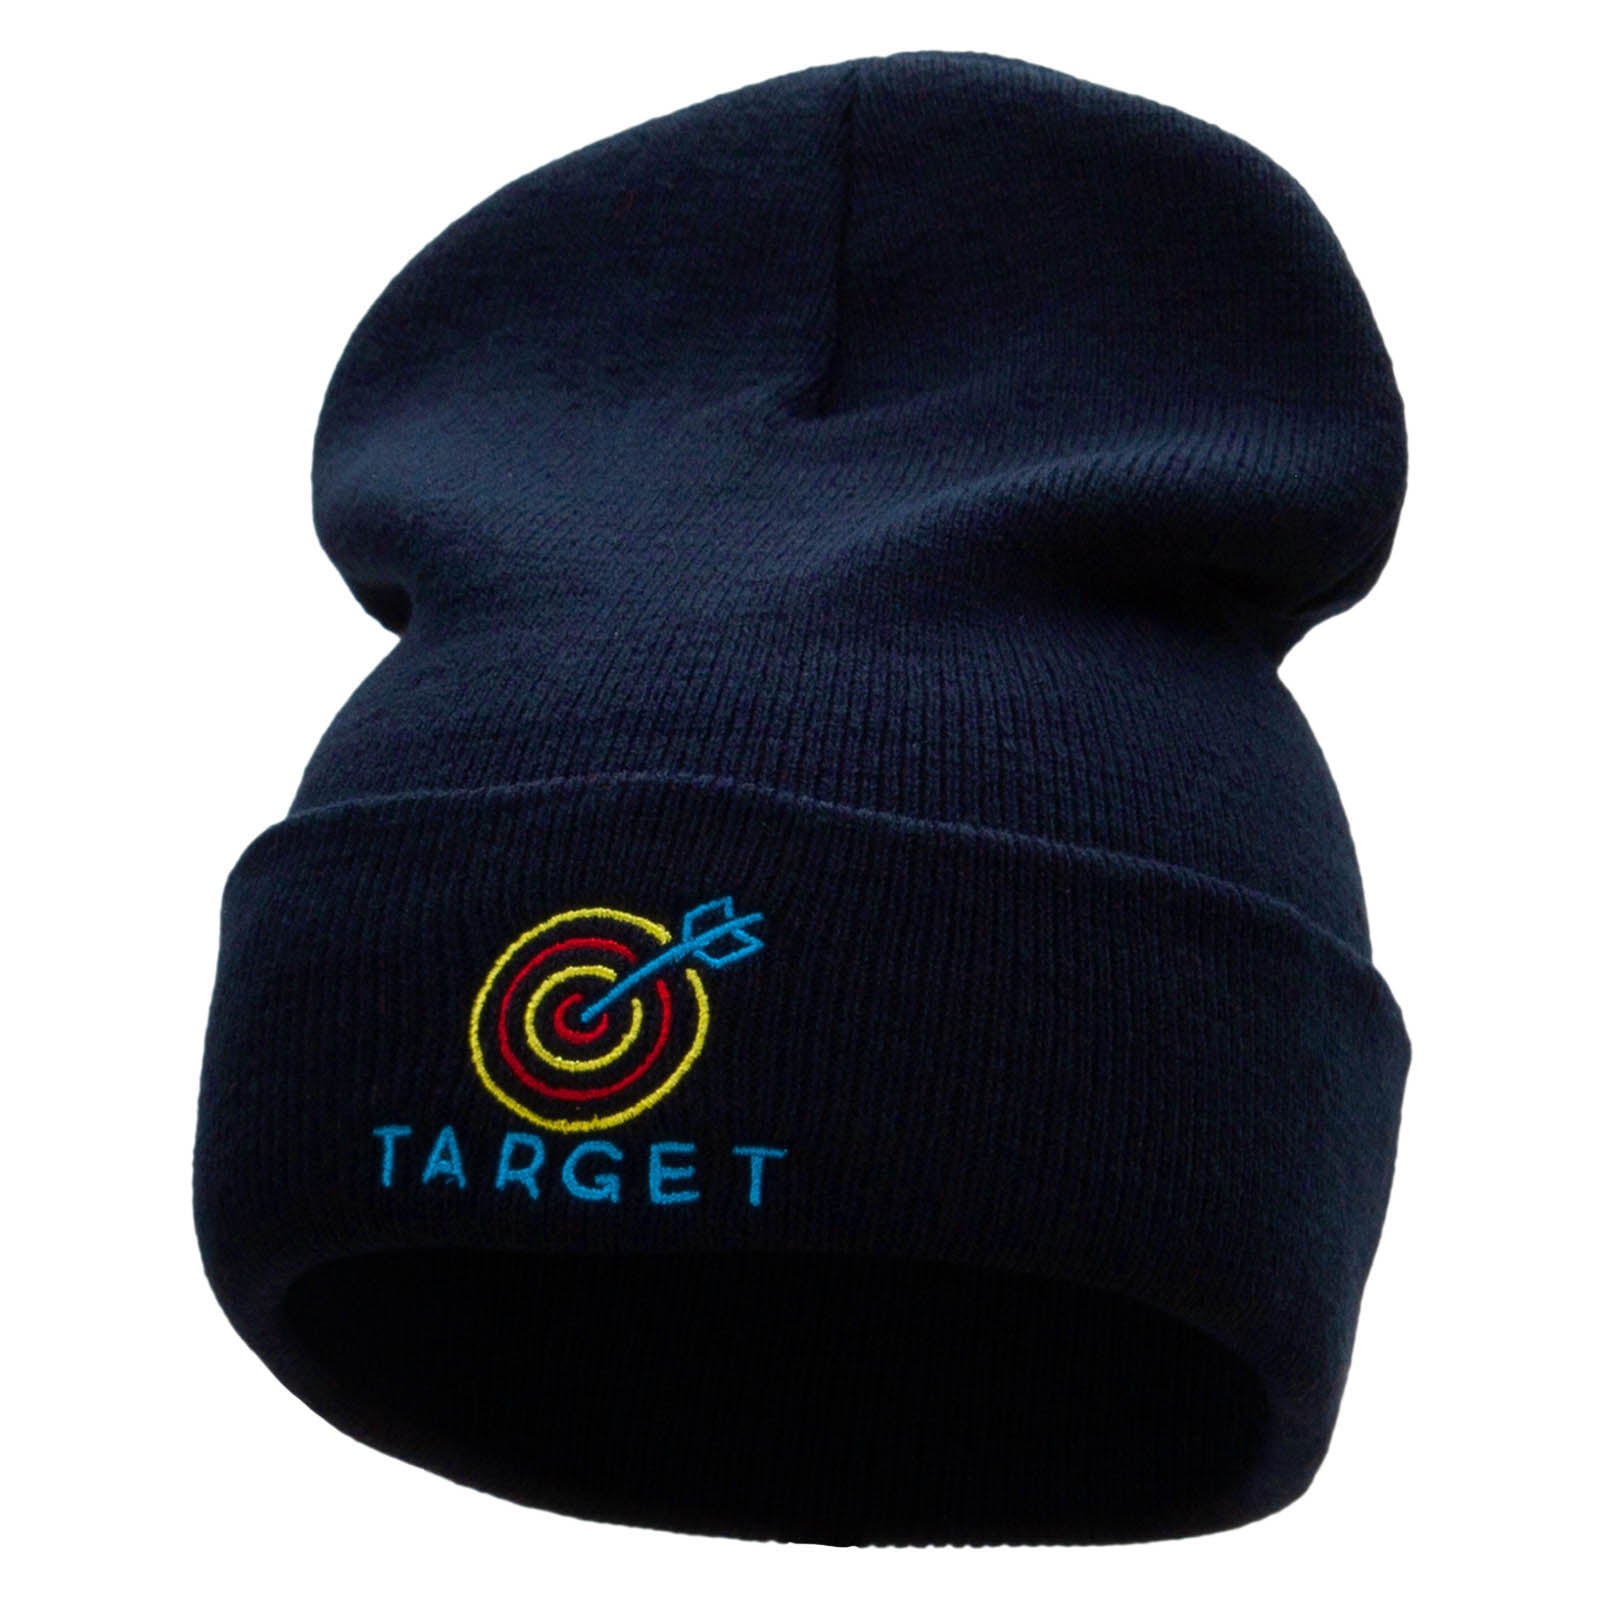 Neon Target Embroidered 12 Inch Long Knitted Beanie - Navy OSFM